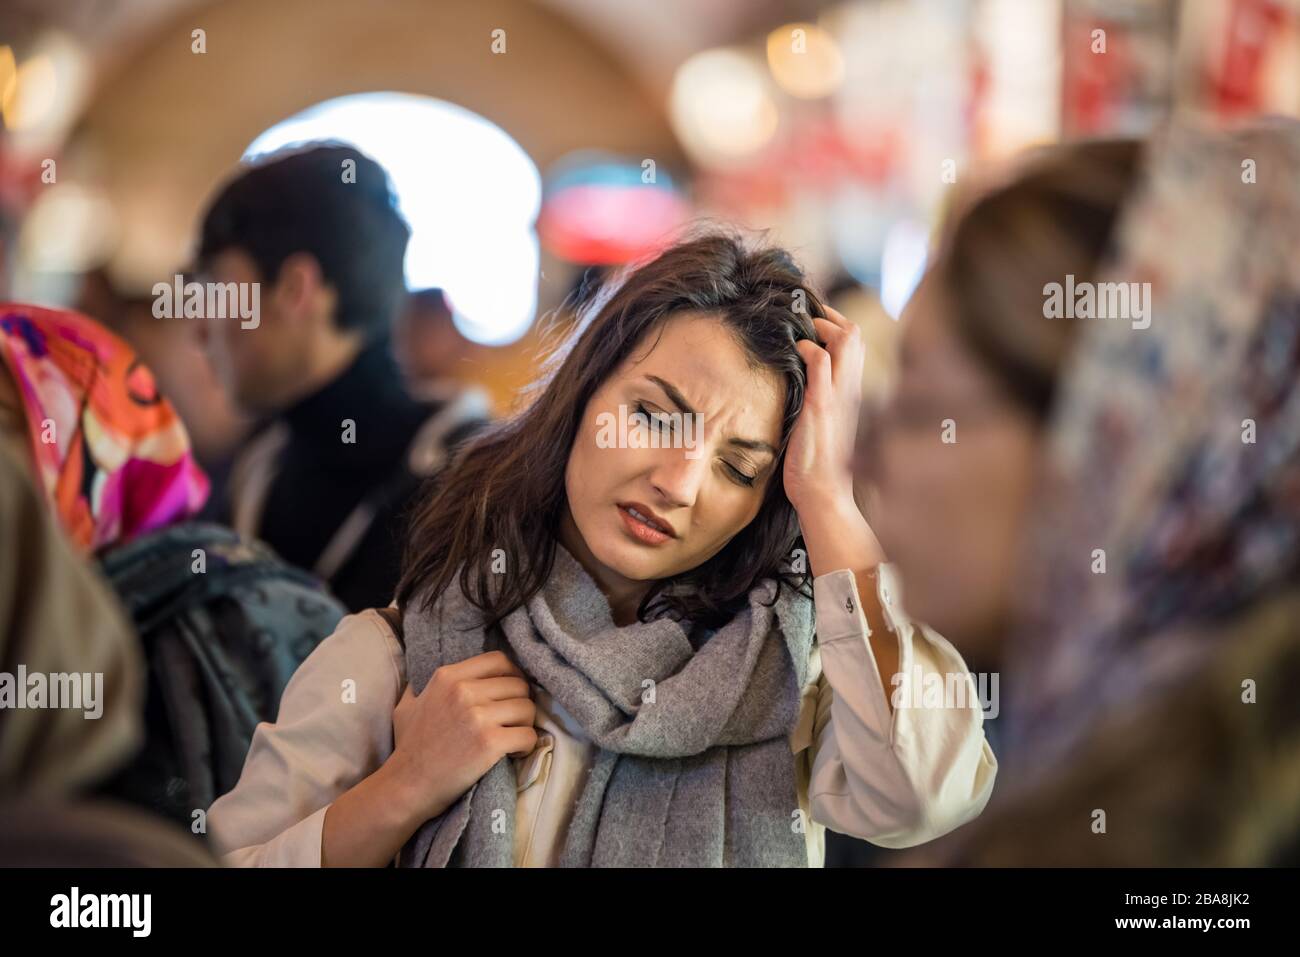 Beautiful woman in fashionable modern clothes suffers migraine or headache problem while standing crowd of people at road. Stock Photo